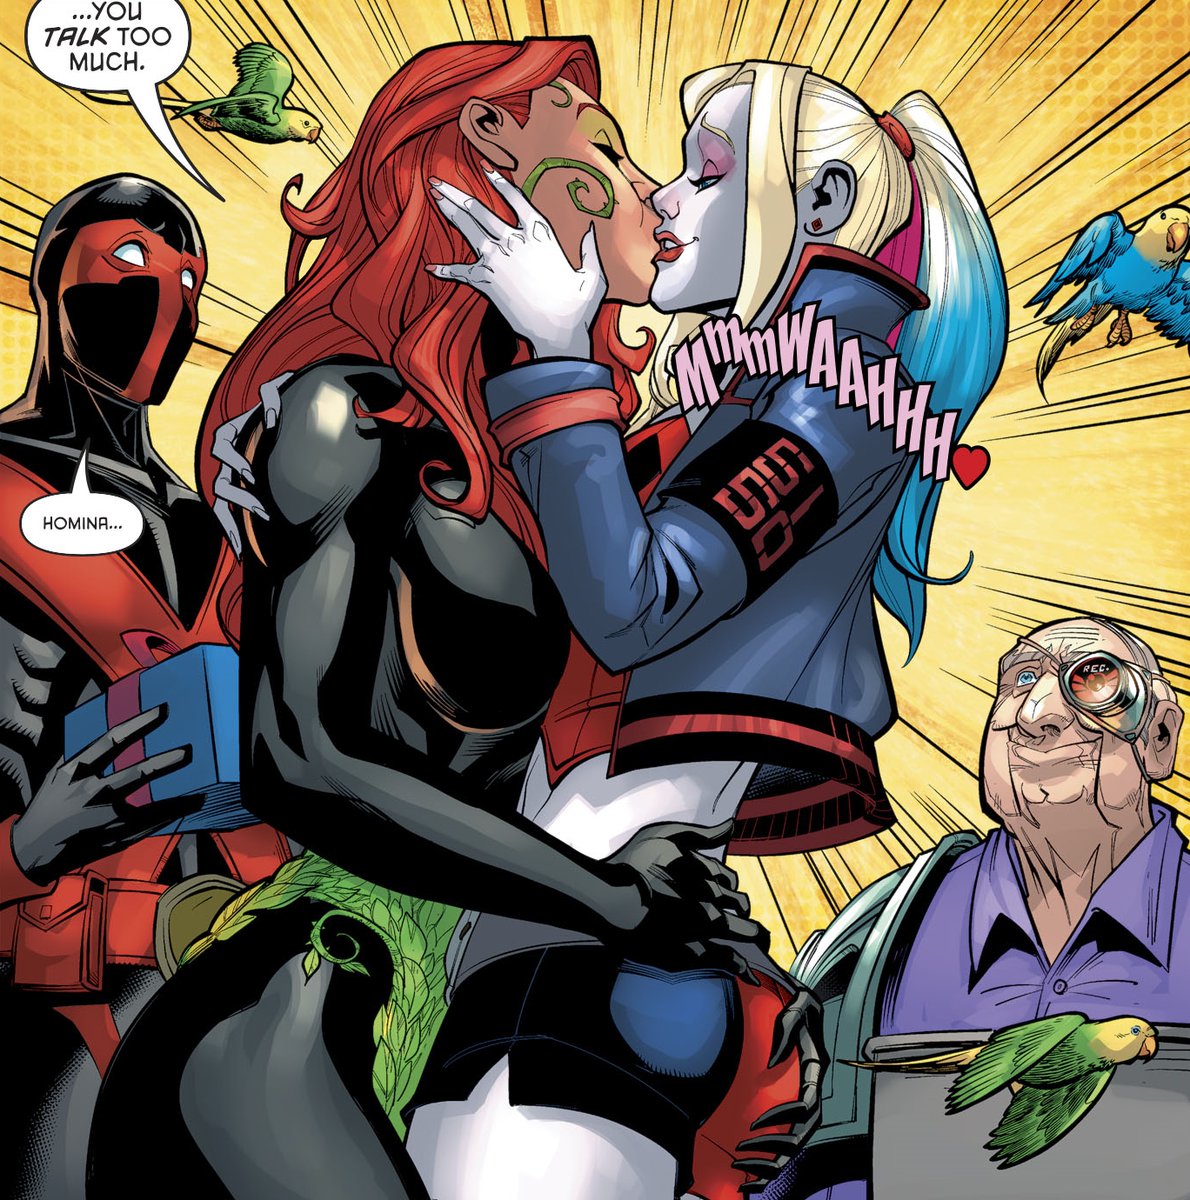 Drawn To Comics Harley Quinn And Poison Ivy Finally Have Their 3